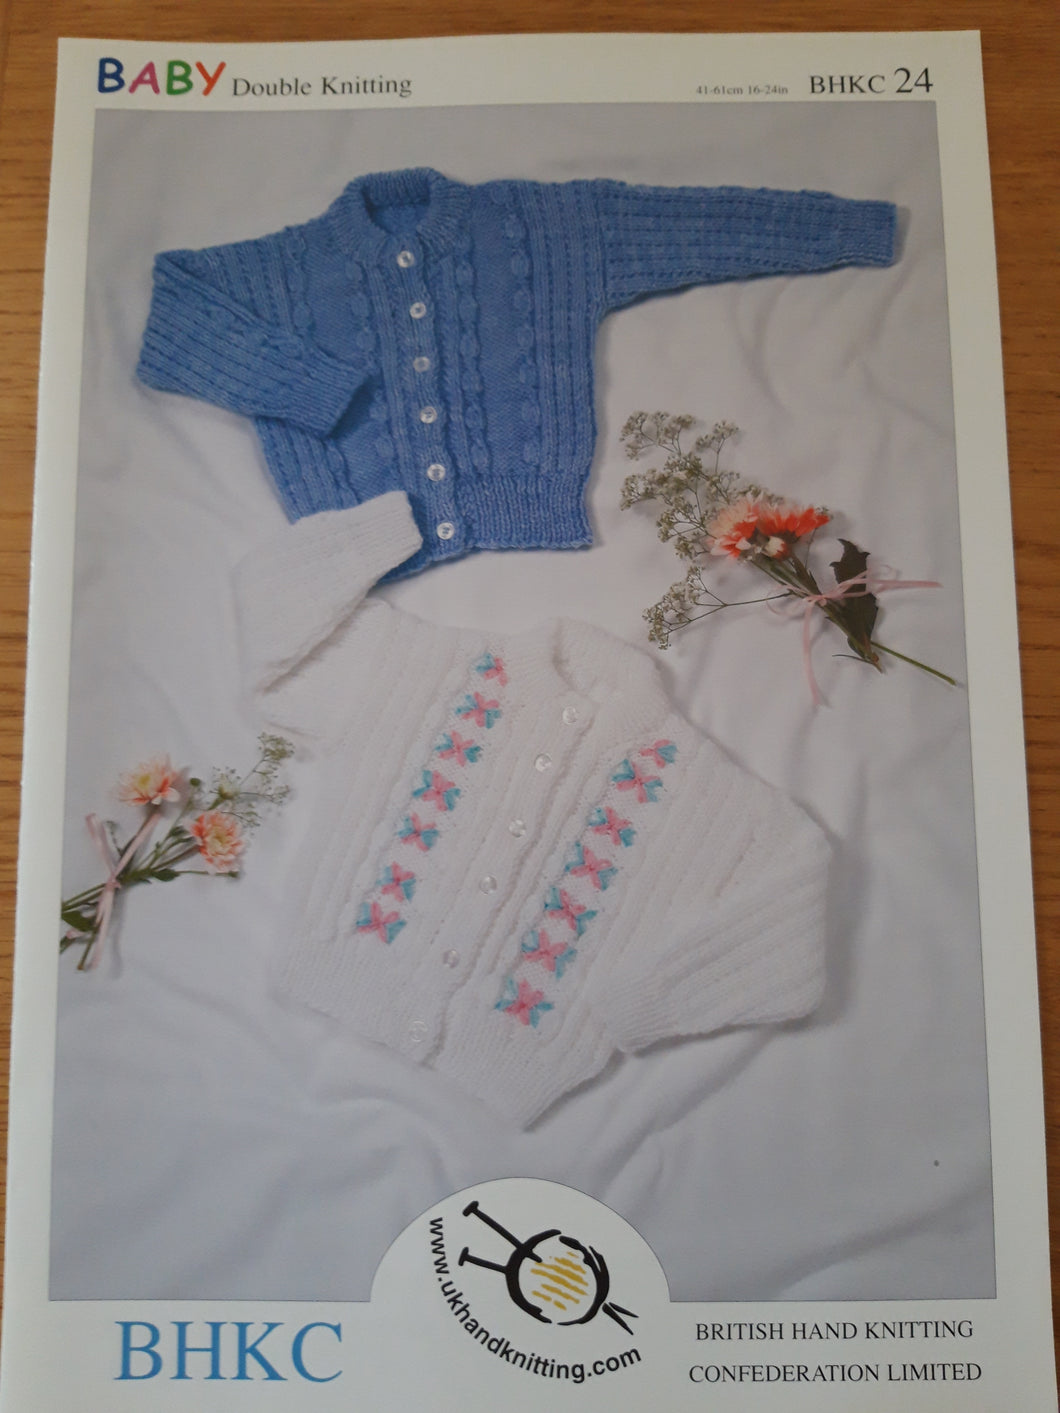 BHKC 24 - Baby Double Knitting Pattern - Cardigan - 16